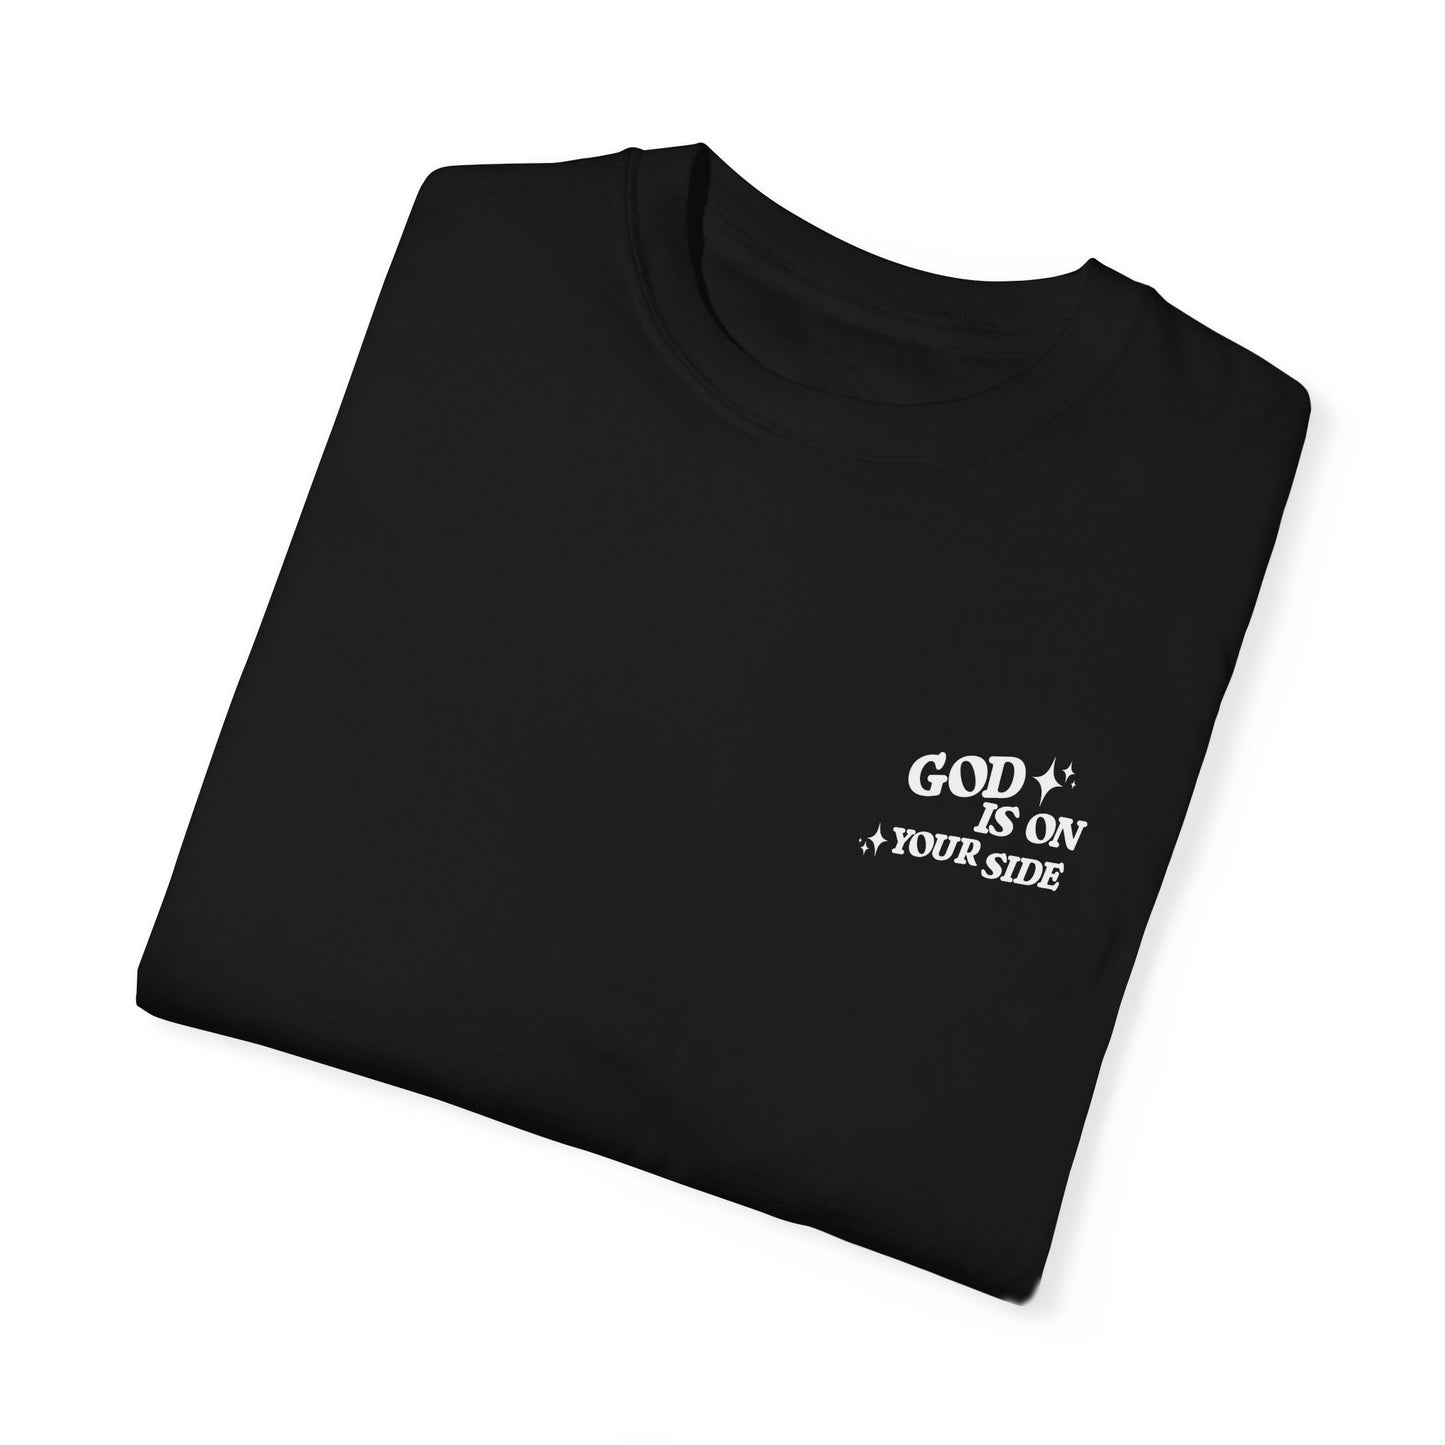 GOD is on your side Tee